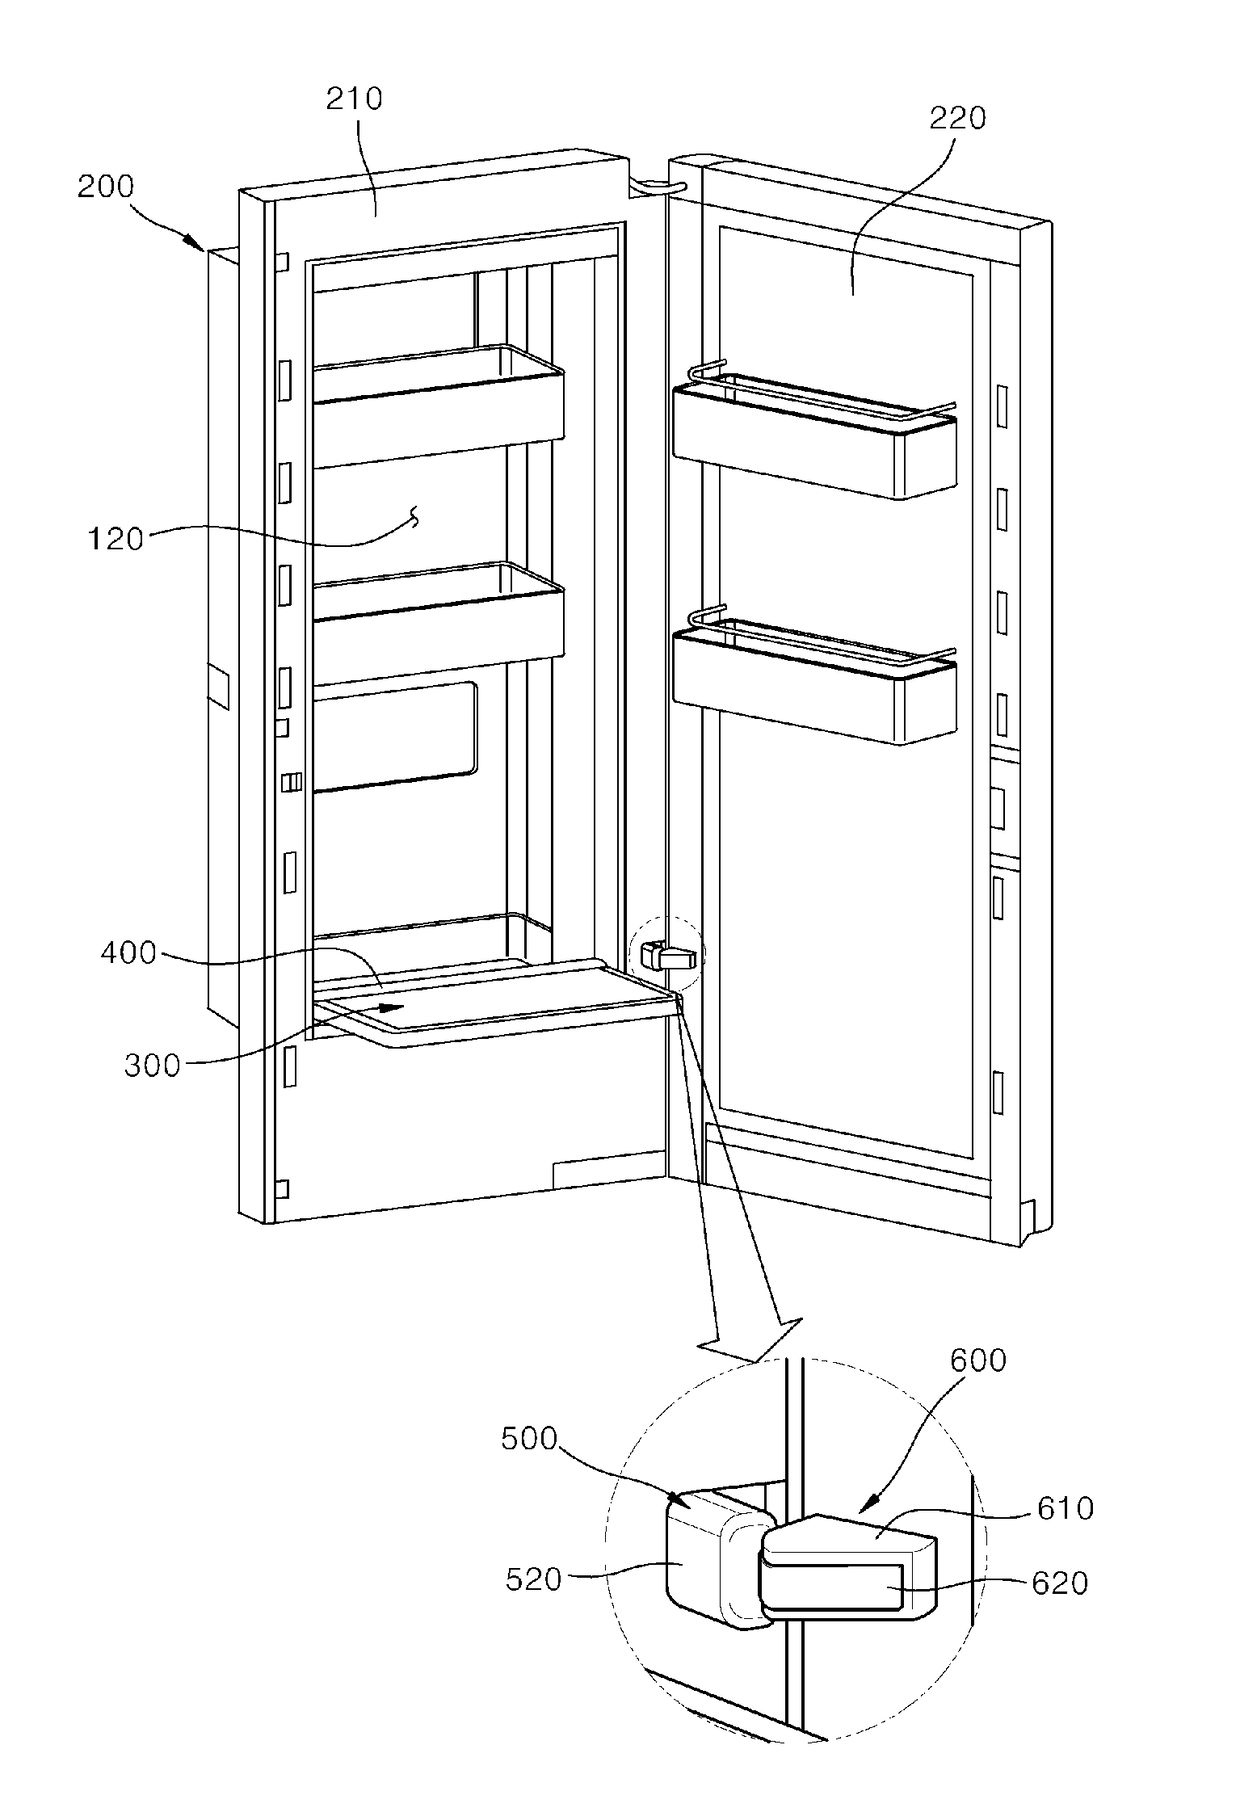 Refrigerator and folding guide device provided therein